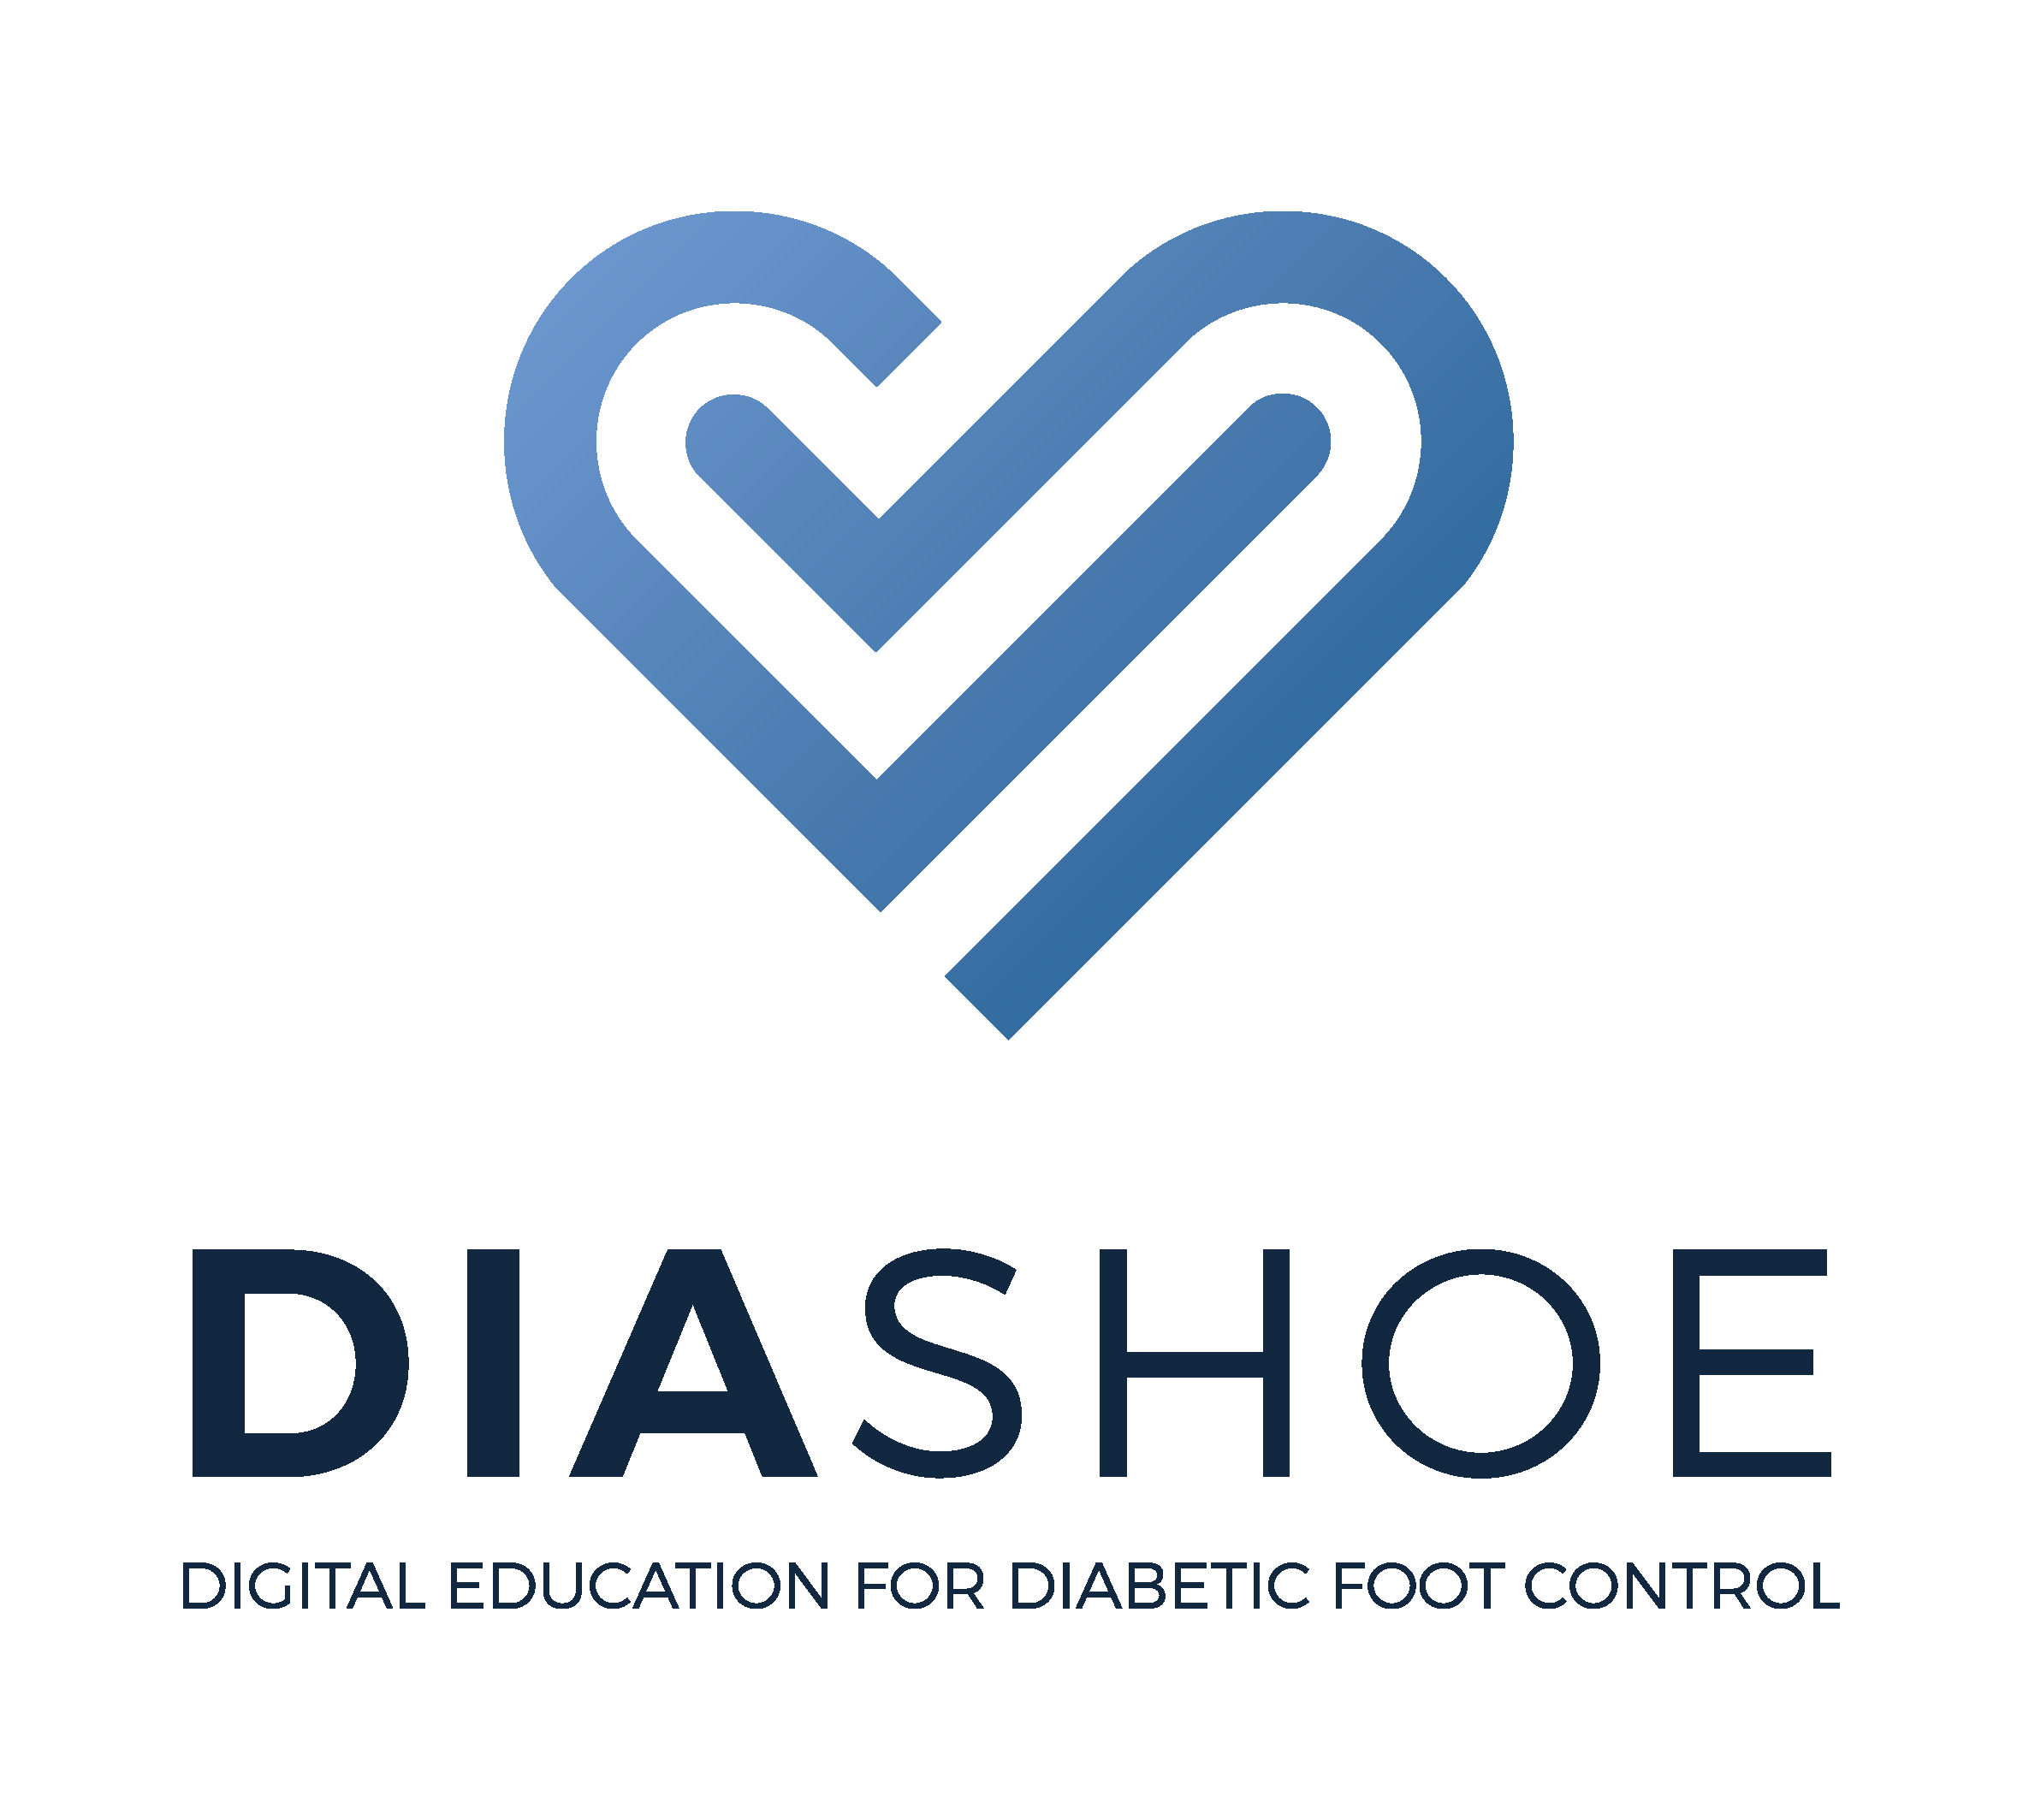 DiaSHOE project: improving the quality of life of people with diabetes 